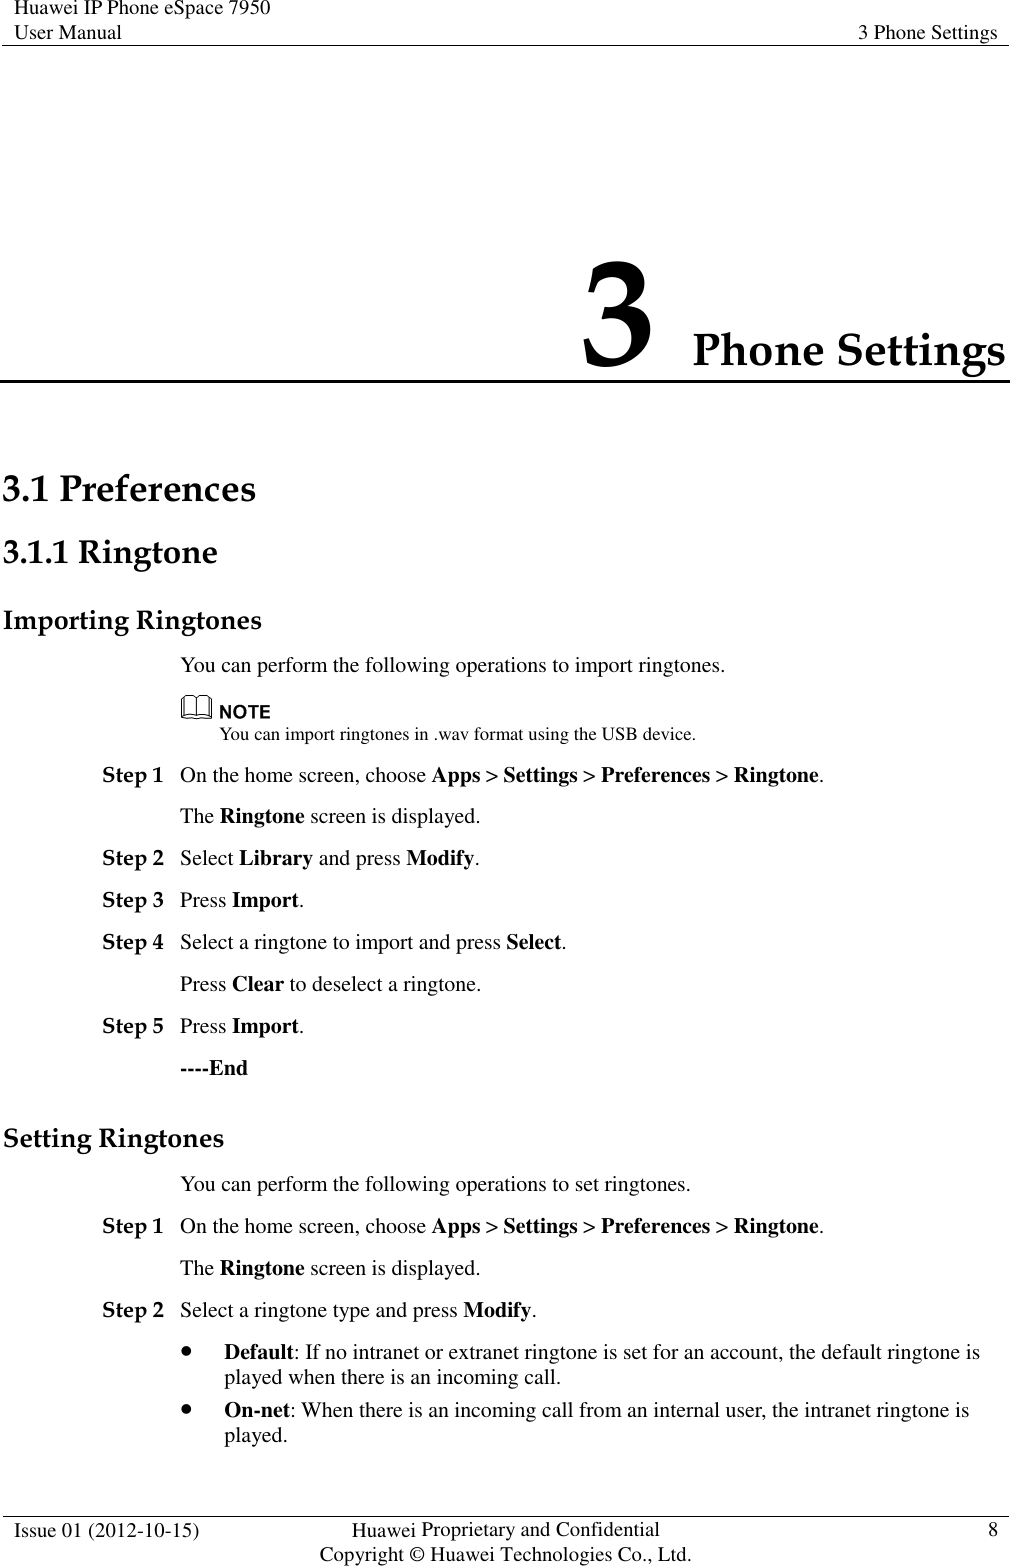 Huawei IP Phone eSpace 7950 User Manual  3 Phone Settings  Issue 01 (2012-10-15)  Huawei Proprietary and Confidential                                     Copyright © Huawei Technologies Co., Ltd.  8  3 Phone Settings 3.1 Preferences 3.1.1 Ringtone Importing Ringtones You can perform the following operations to import ringtones.  You can import ringtones in .wav format using the USB device. Step 1 On the home screen, choose Apps &gt; Settings &gt; Preferences &gt; Ringtone. The Ringtone screen is displayed. Step 2 Select Library and press Modify. Step 3 Press Import. Step 4 Select a ringtone to import and press Select. Press Clear to deselect a ringtone. Step 5 Press Import. ----End Setting Ringtones You can perform the following operations to set ringtones. Step 1 On the home screen, choose Apps &gt; Settings &gt; Preferences &gt; Ringtone. The Ringtone screen is displayed. Step 2 Select a ringtone type and press Modify.  Default: If no intranet or extranet ringtone is set for an account, the default ringtone is played when there is an incoming call.  On-net: When there is an incoming call from an internal user, the intranet ringtone is played. 